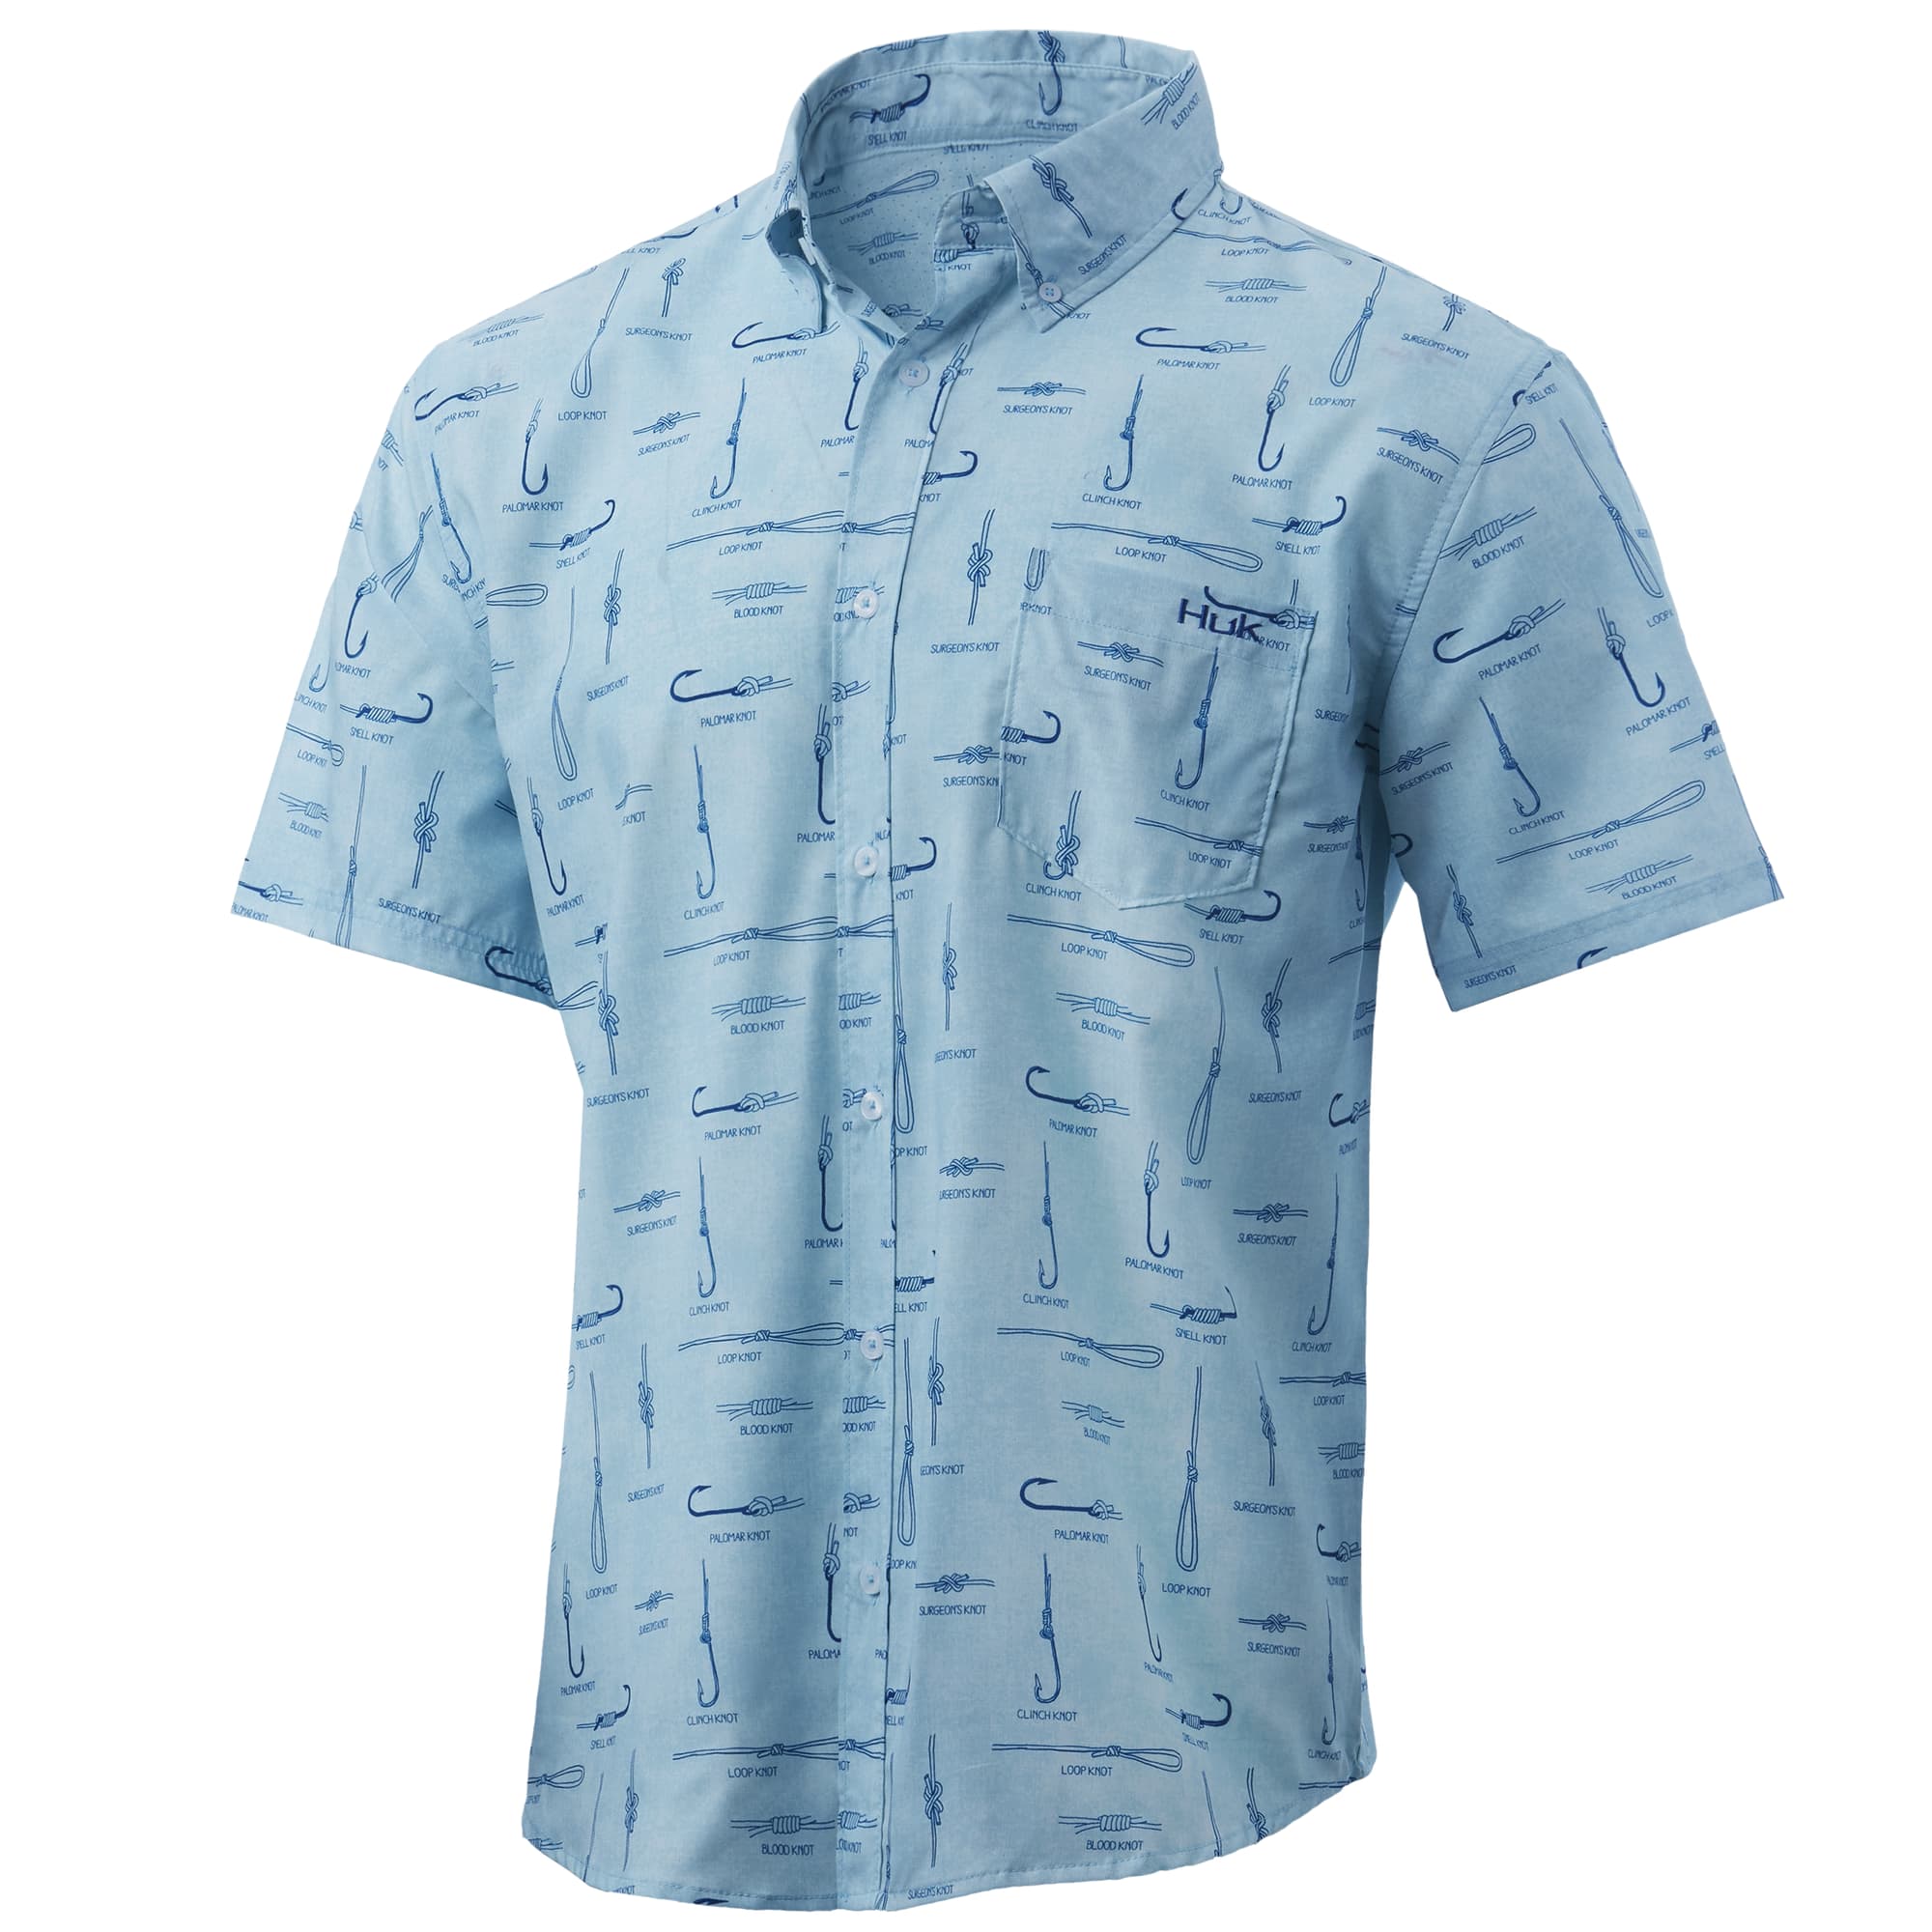 Huk Men's Huk And Knots Teaser - Ice Blue - XL